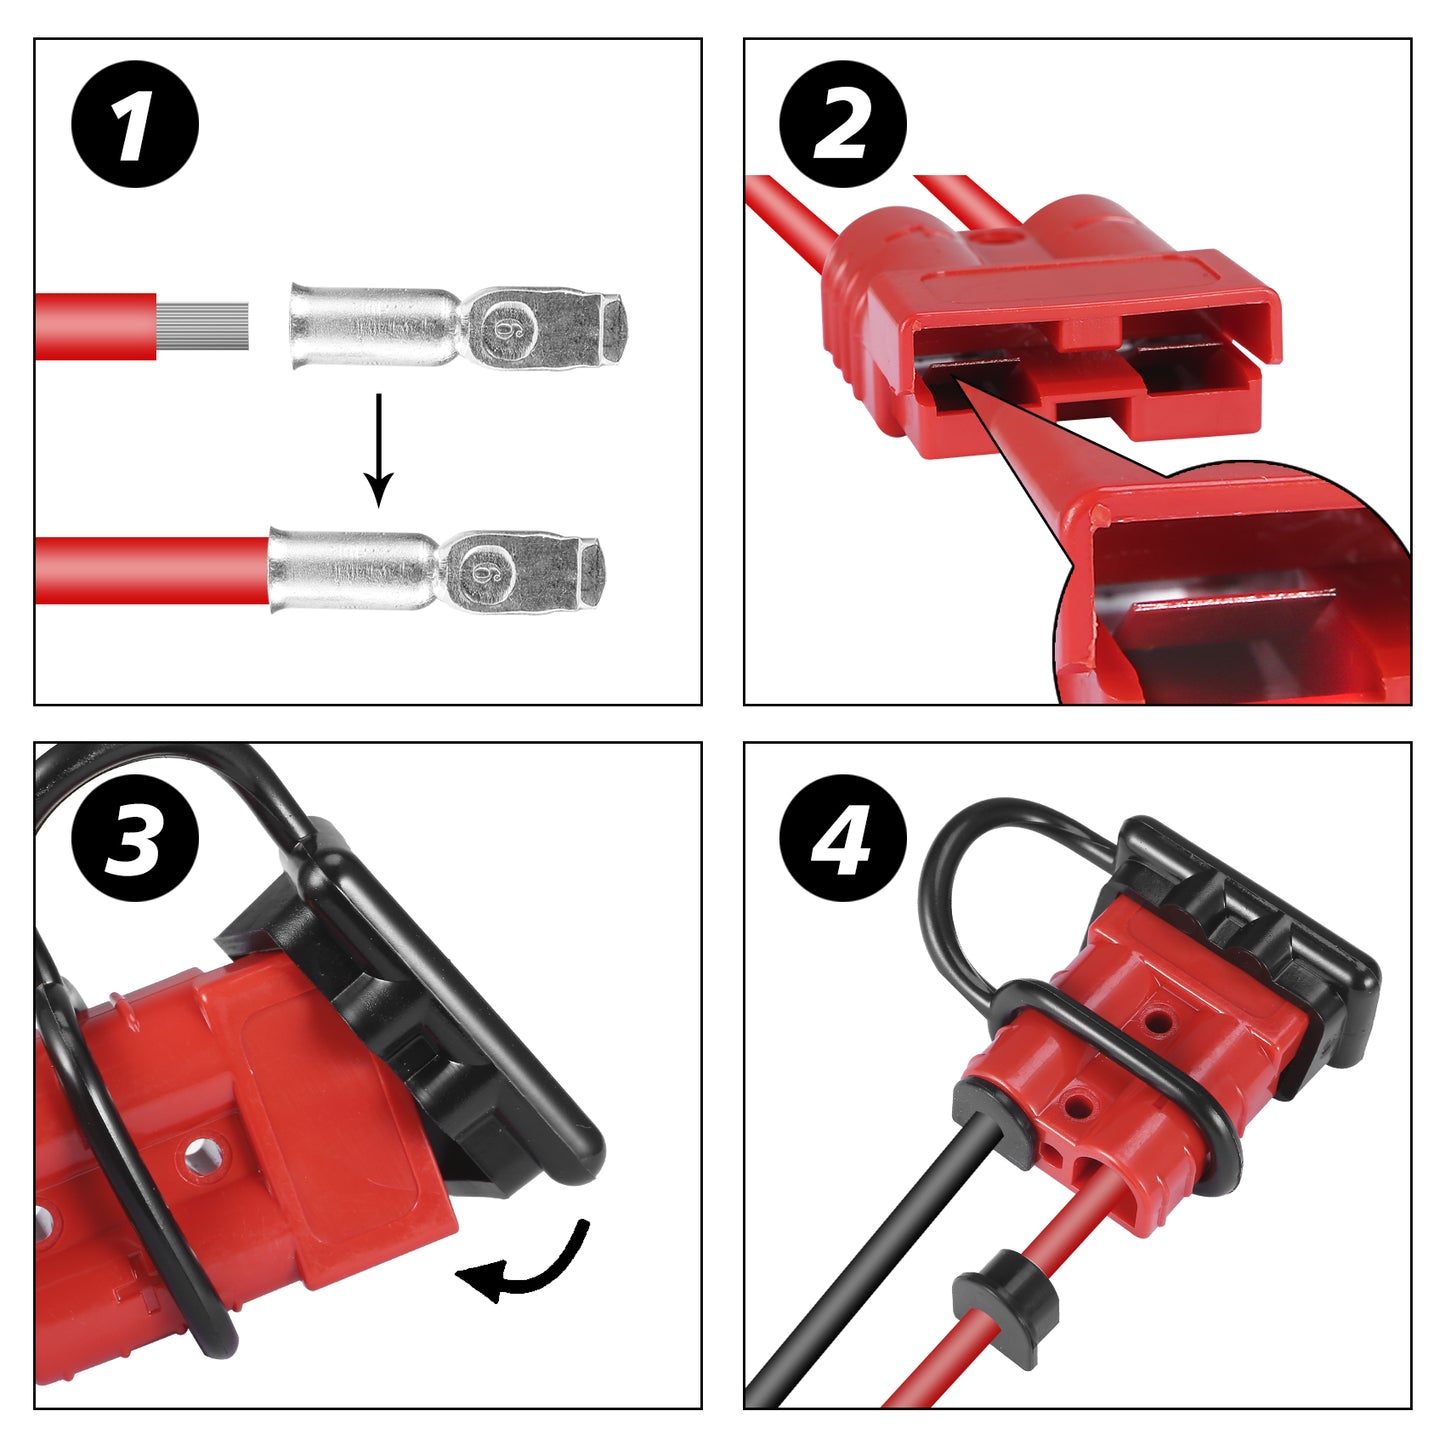 MUYI 2PCS 50Amp Battery Cable Quick Connect/Disconnect Plug Kit, 6-10 Gauge Wire Harness Connector for Recovery Winch Auto Car Trailer Marine Boat (Red)